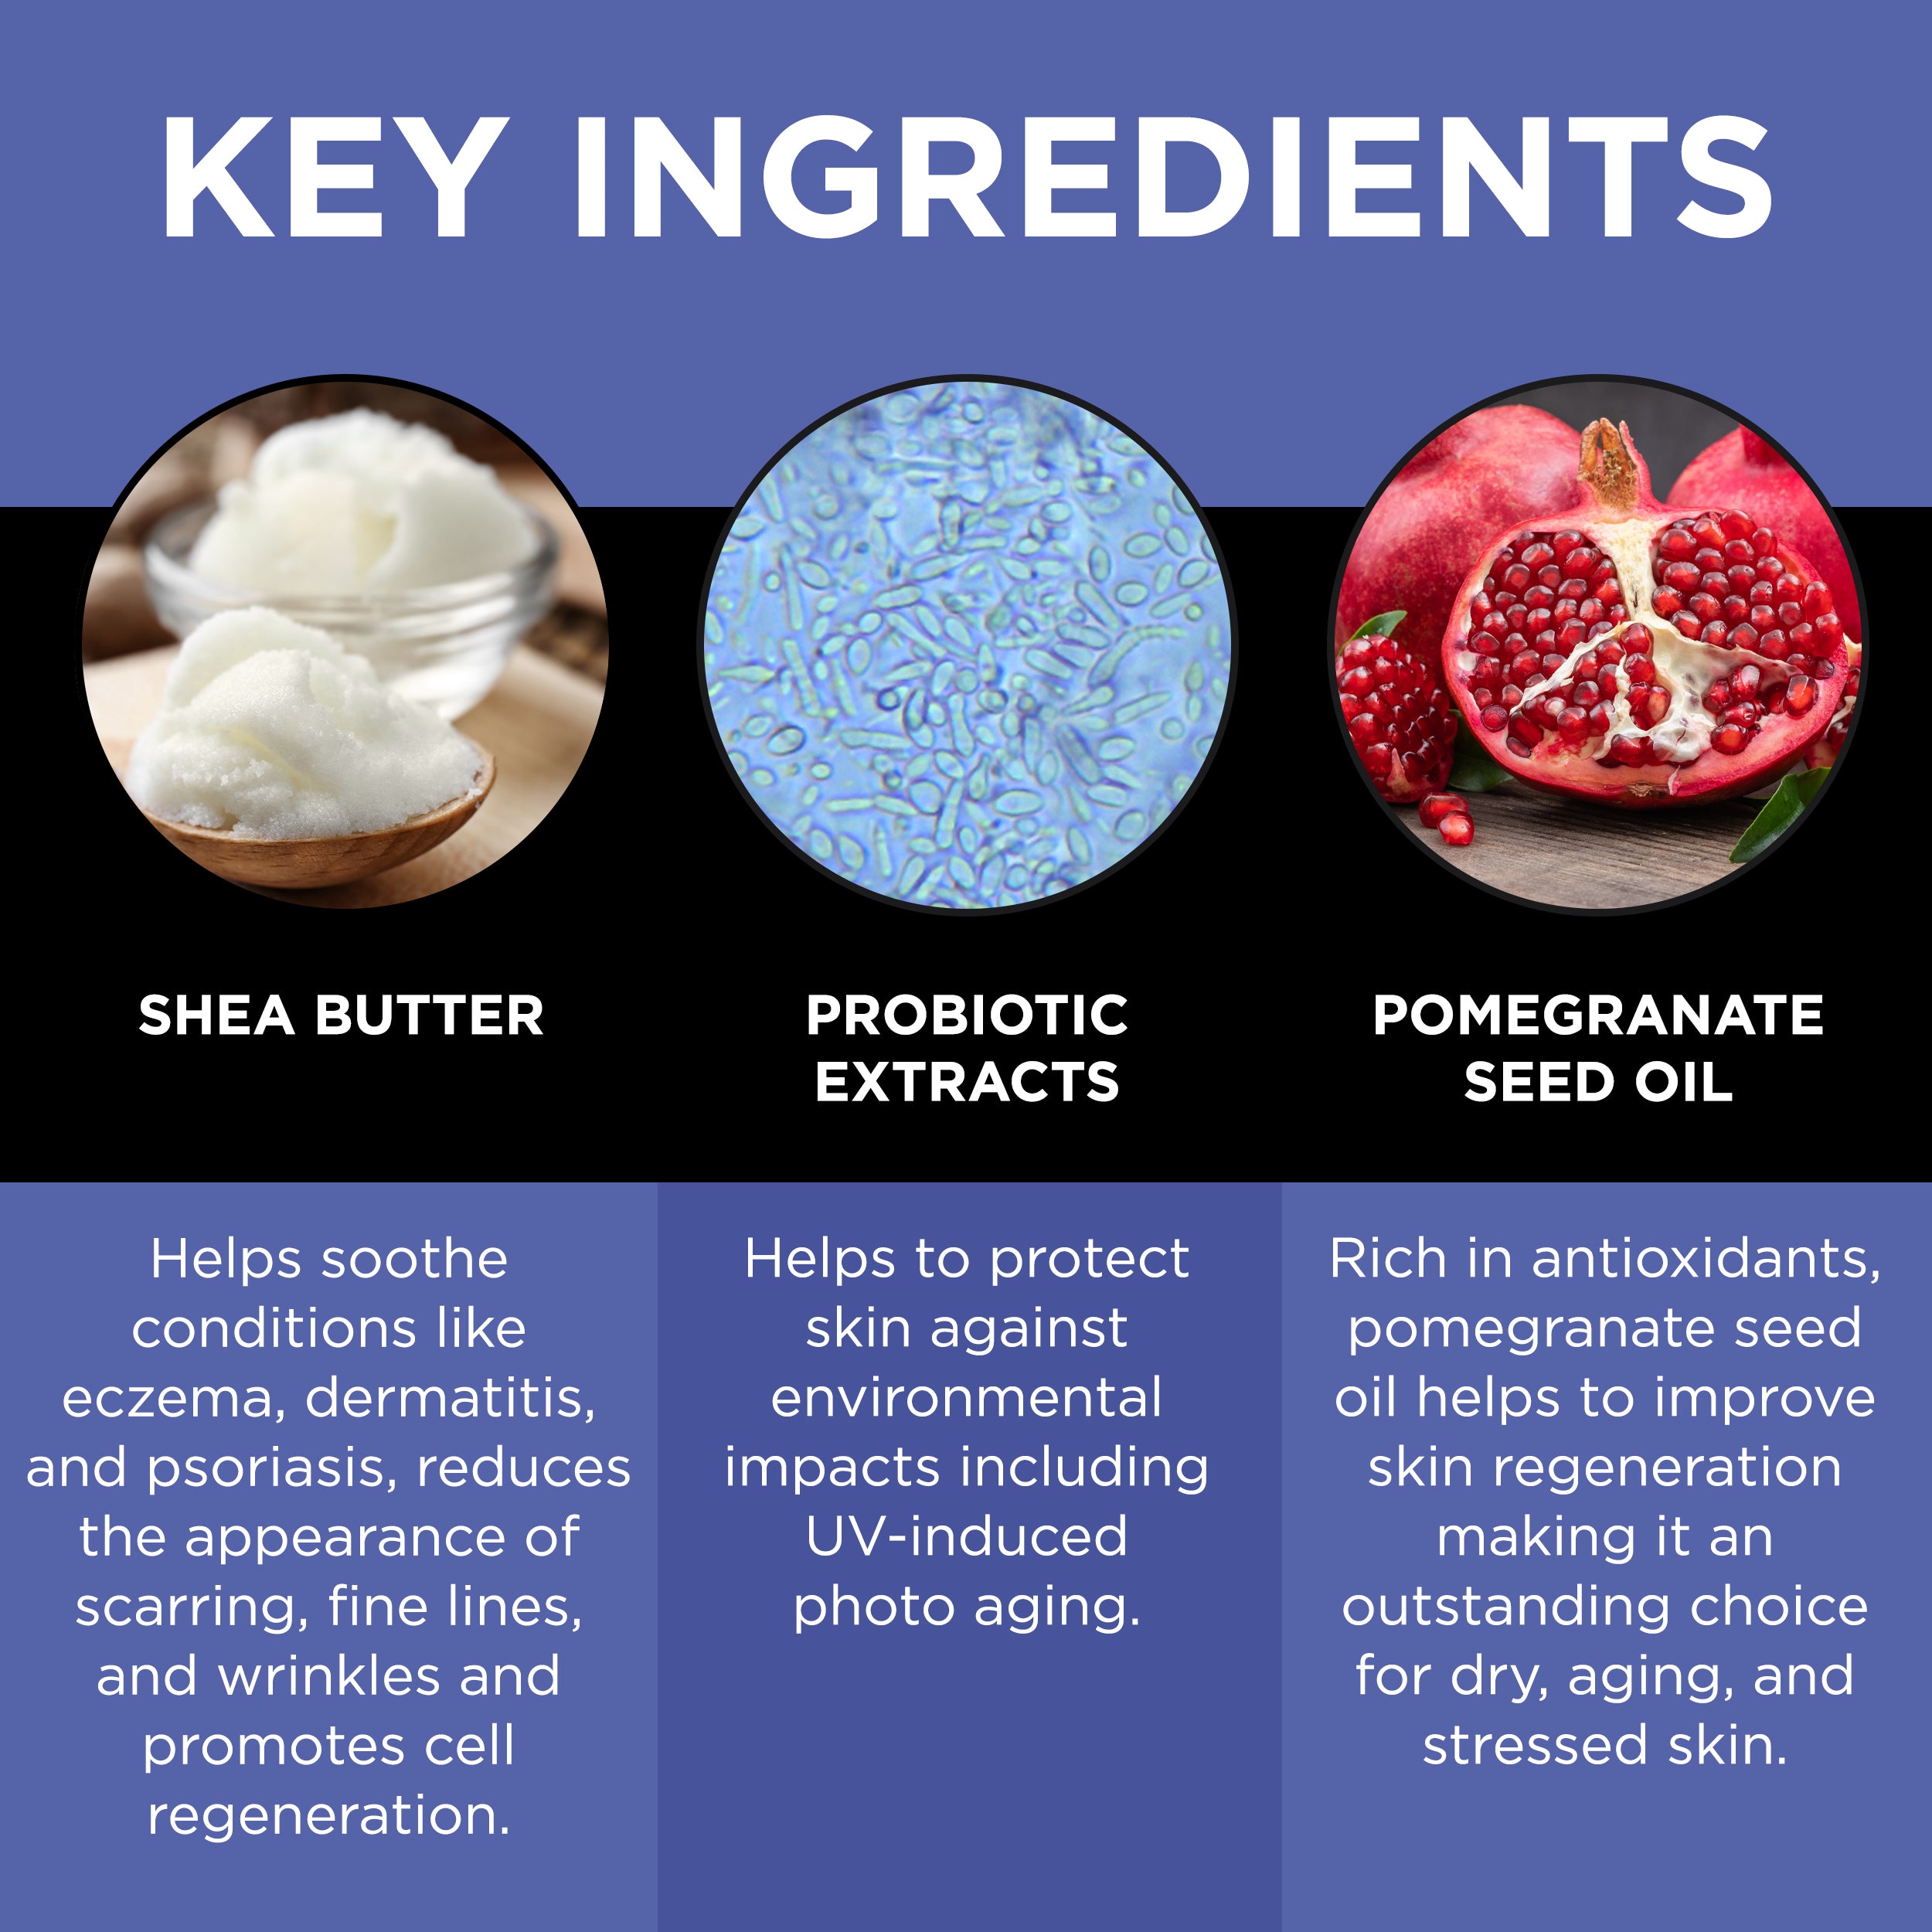 shea butter skin care | probiotic extracts | pomegranate skin care